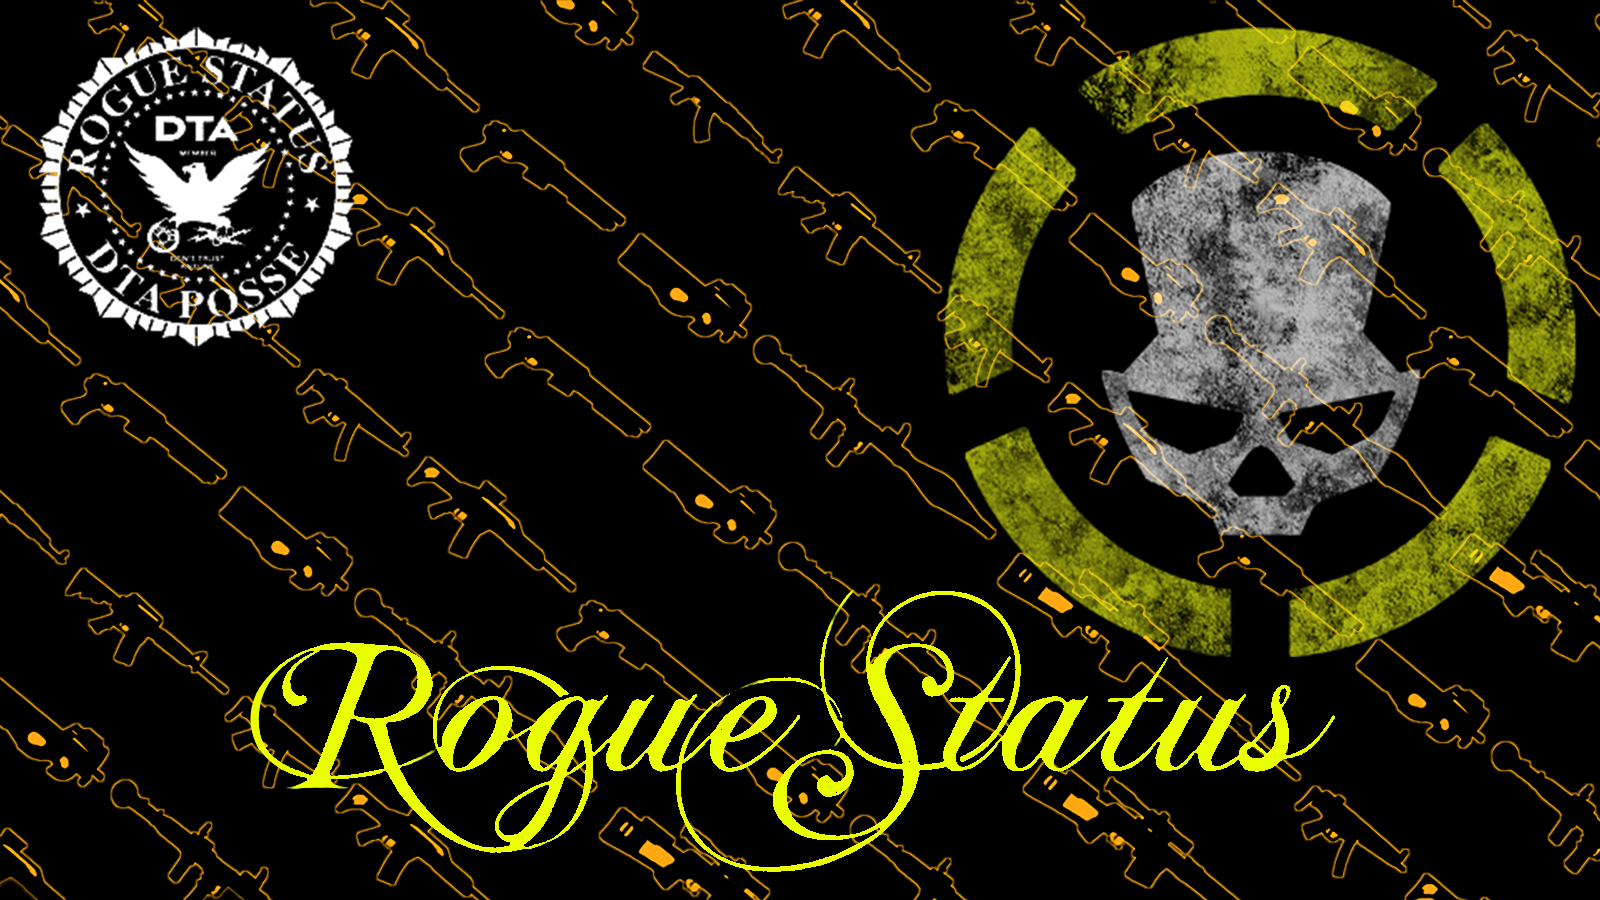 Rogue status dta the division manhunt wallpaper by everydreday on